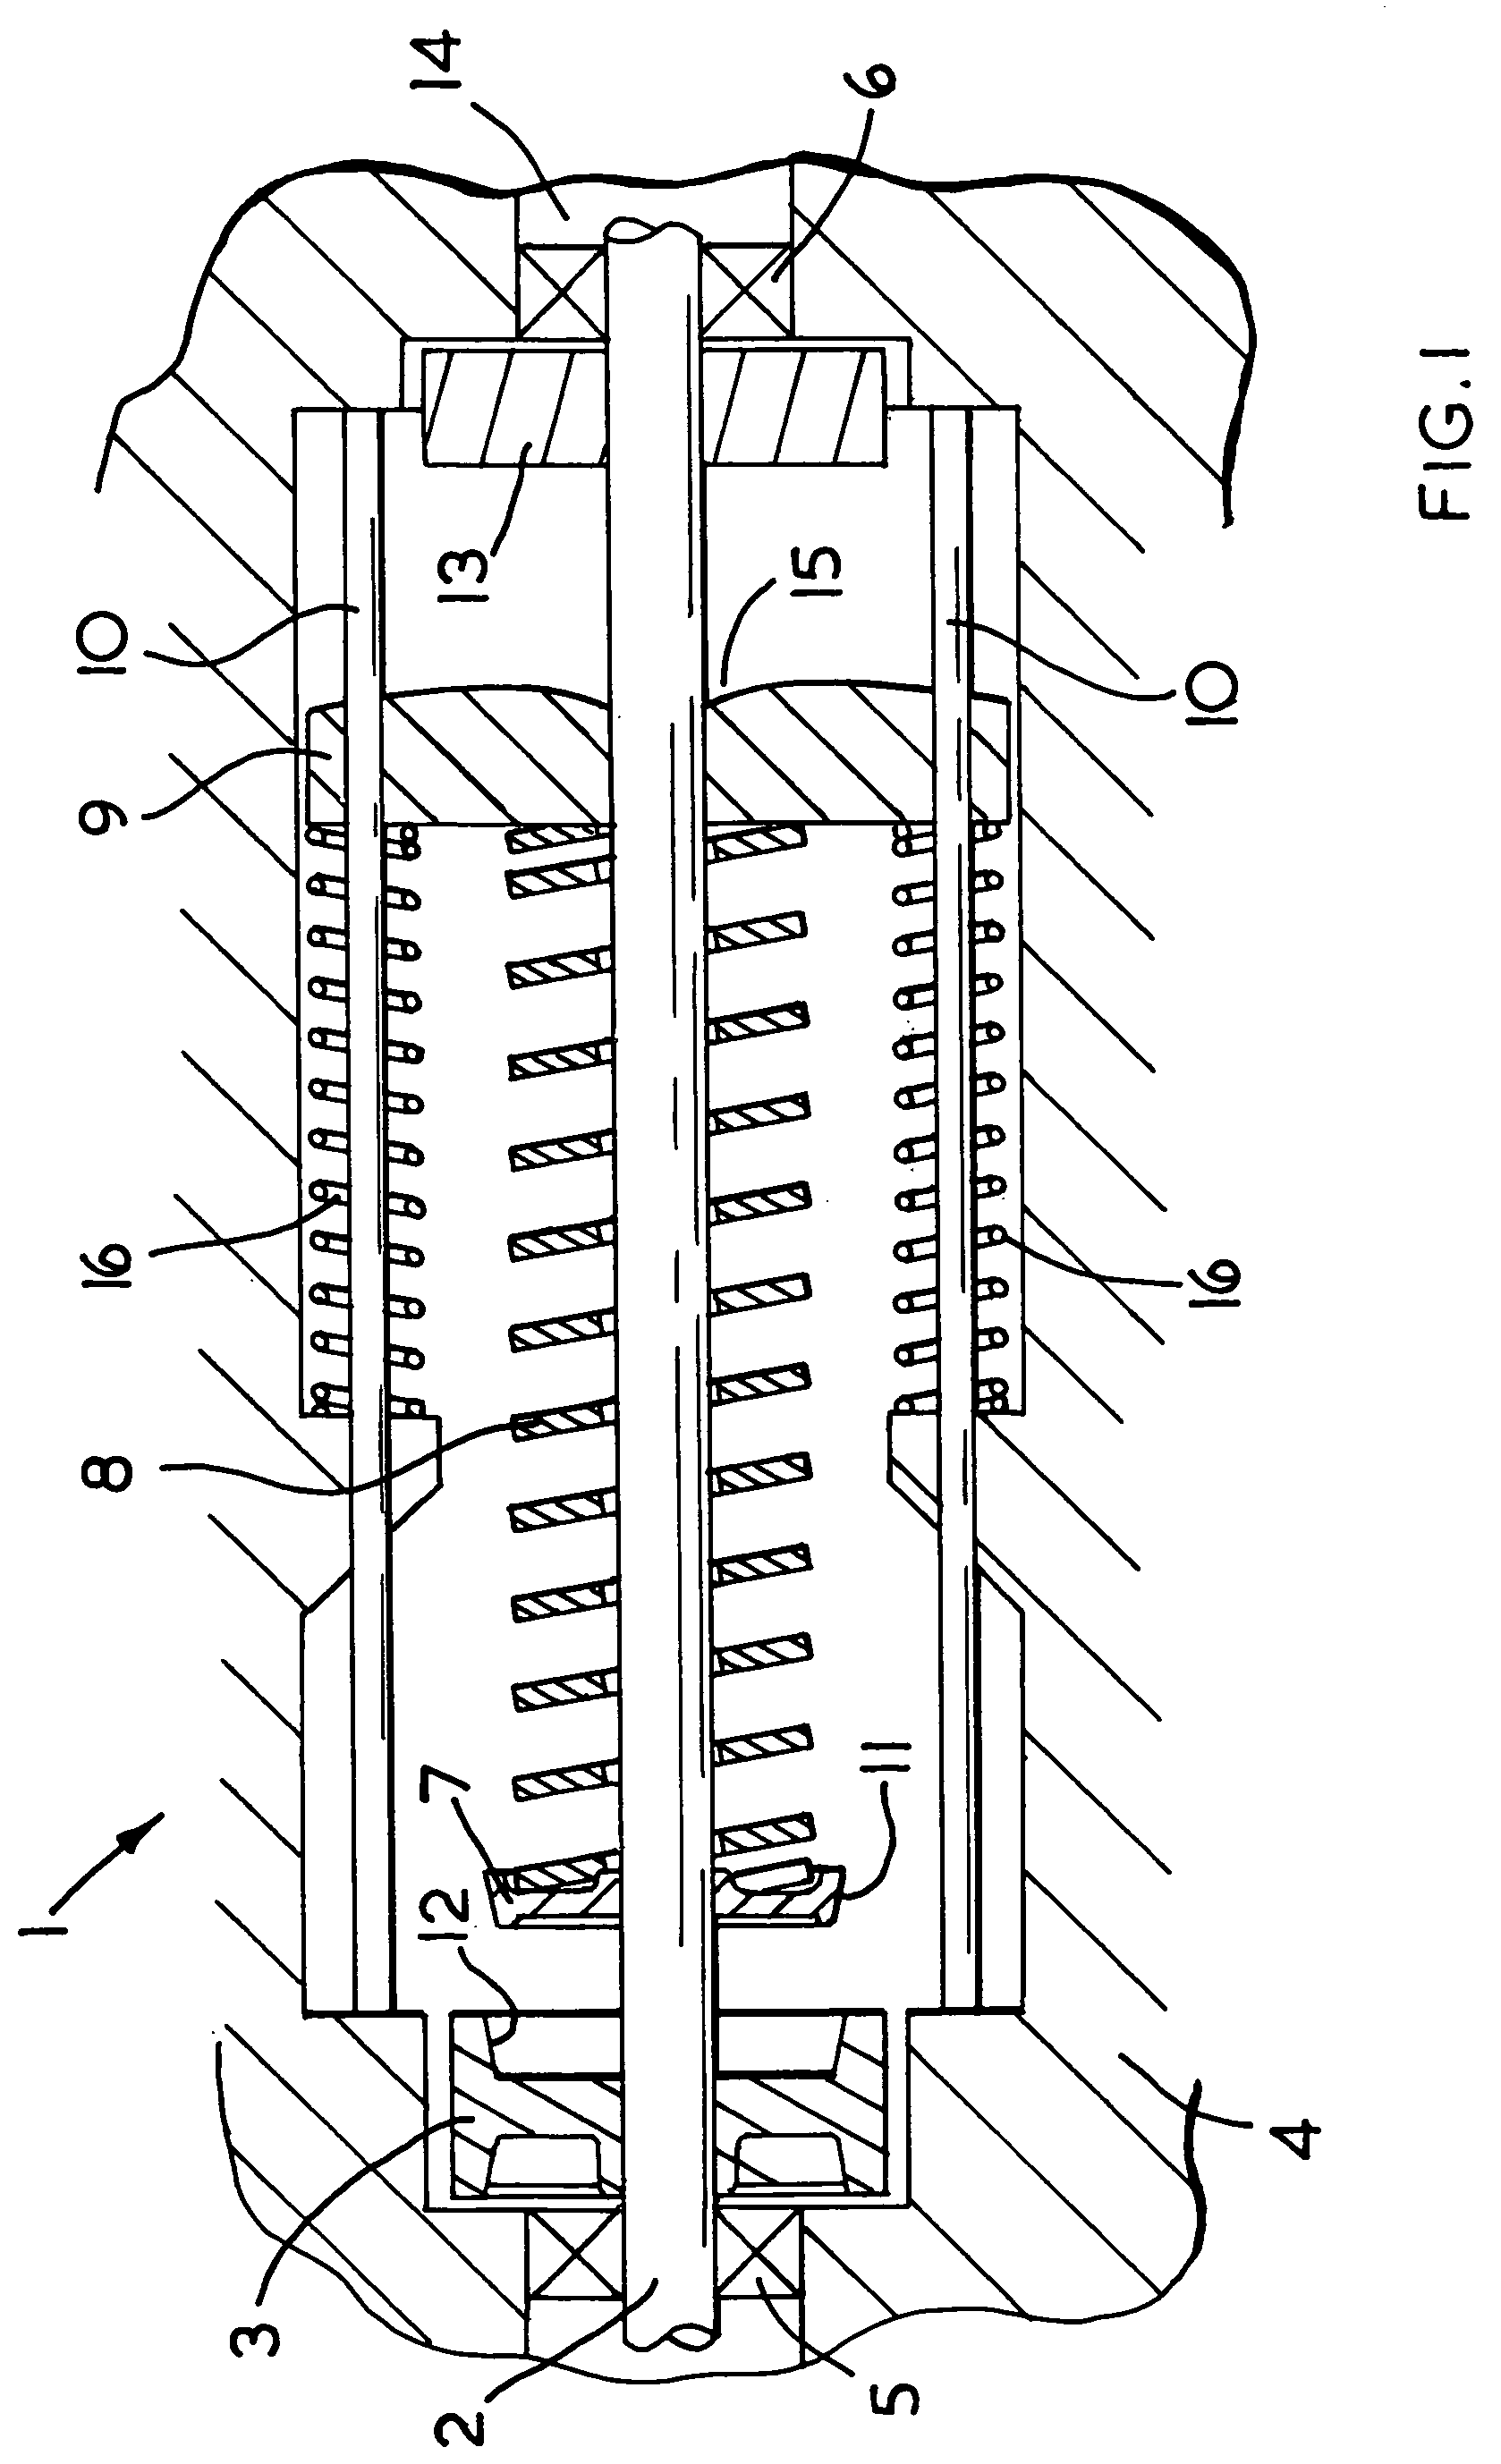 Apparatus for producing self-exciting hammer action, and rotary power tool incorporating such apparatus